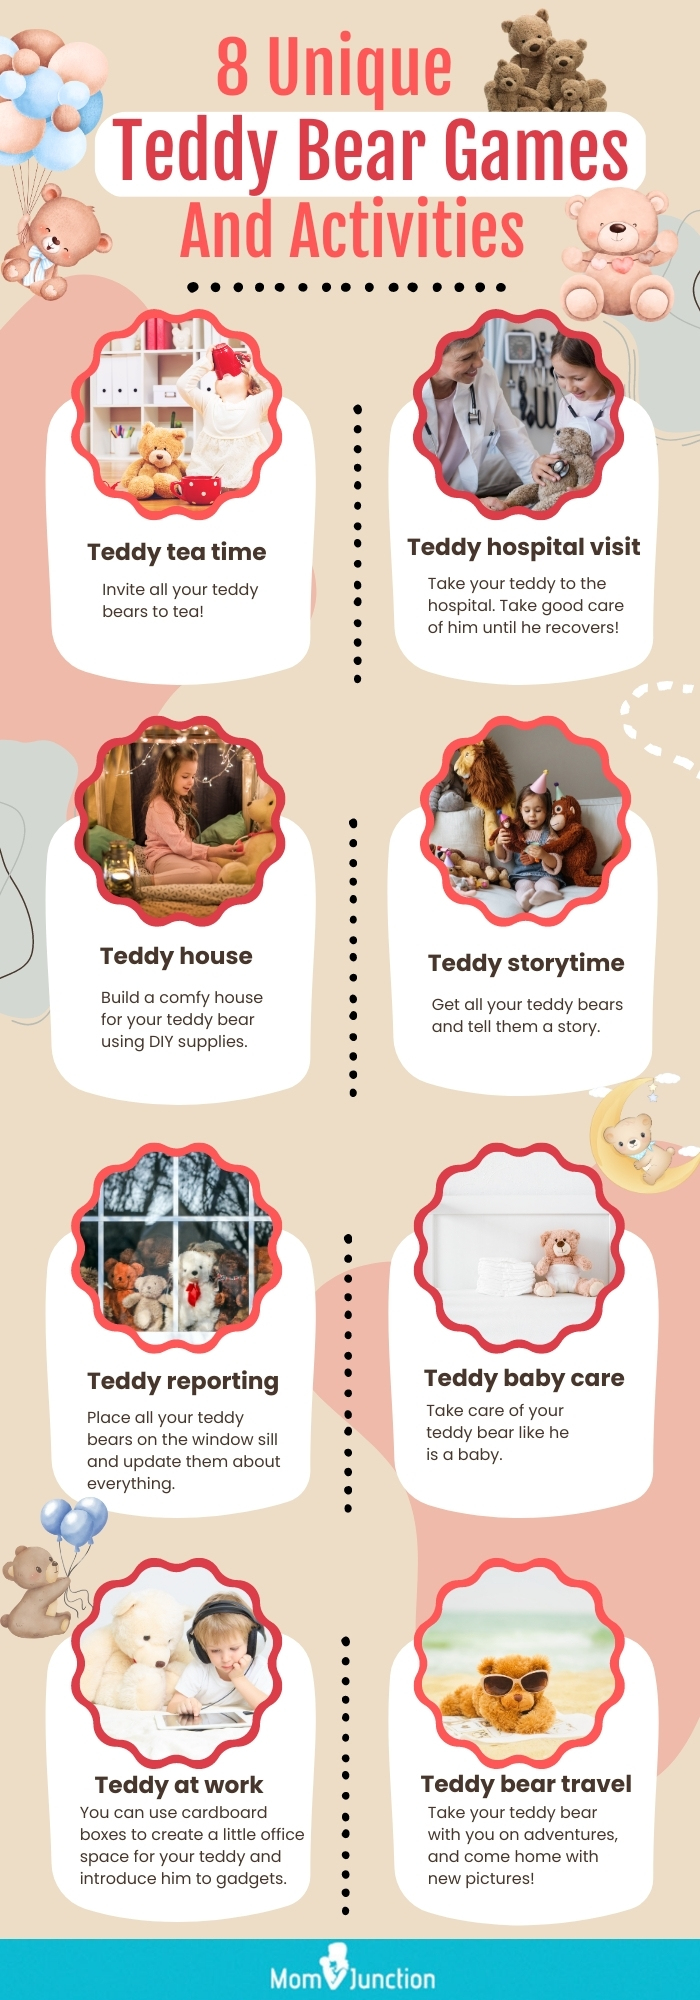 8 unique teddy bear games and activities (infographic)